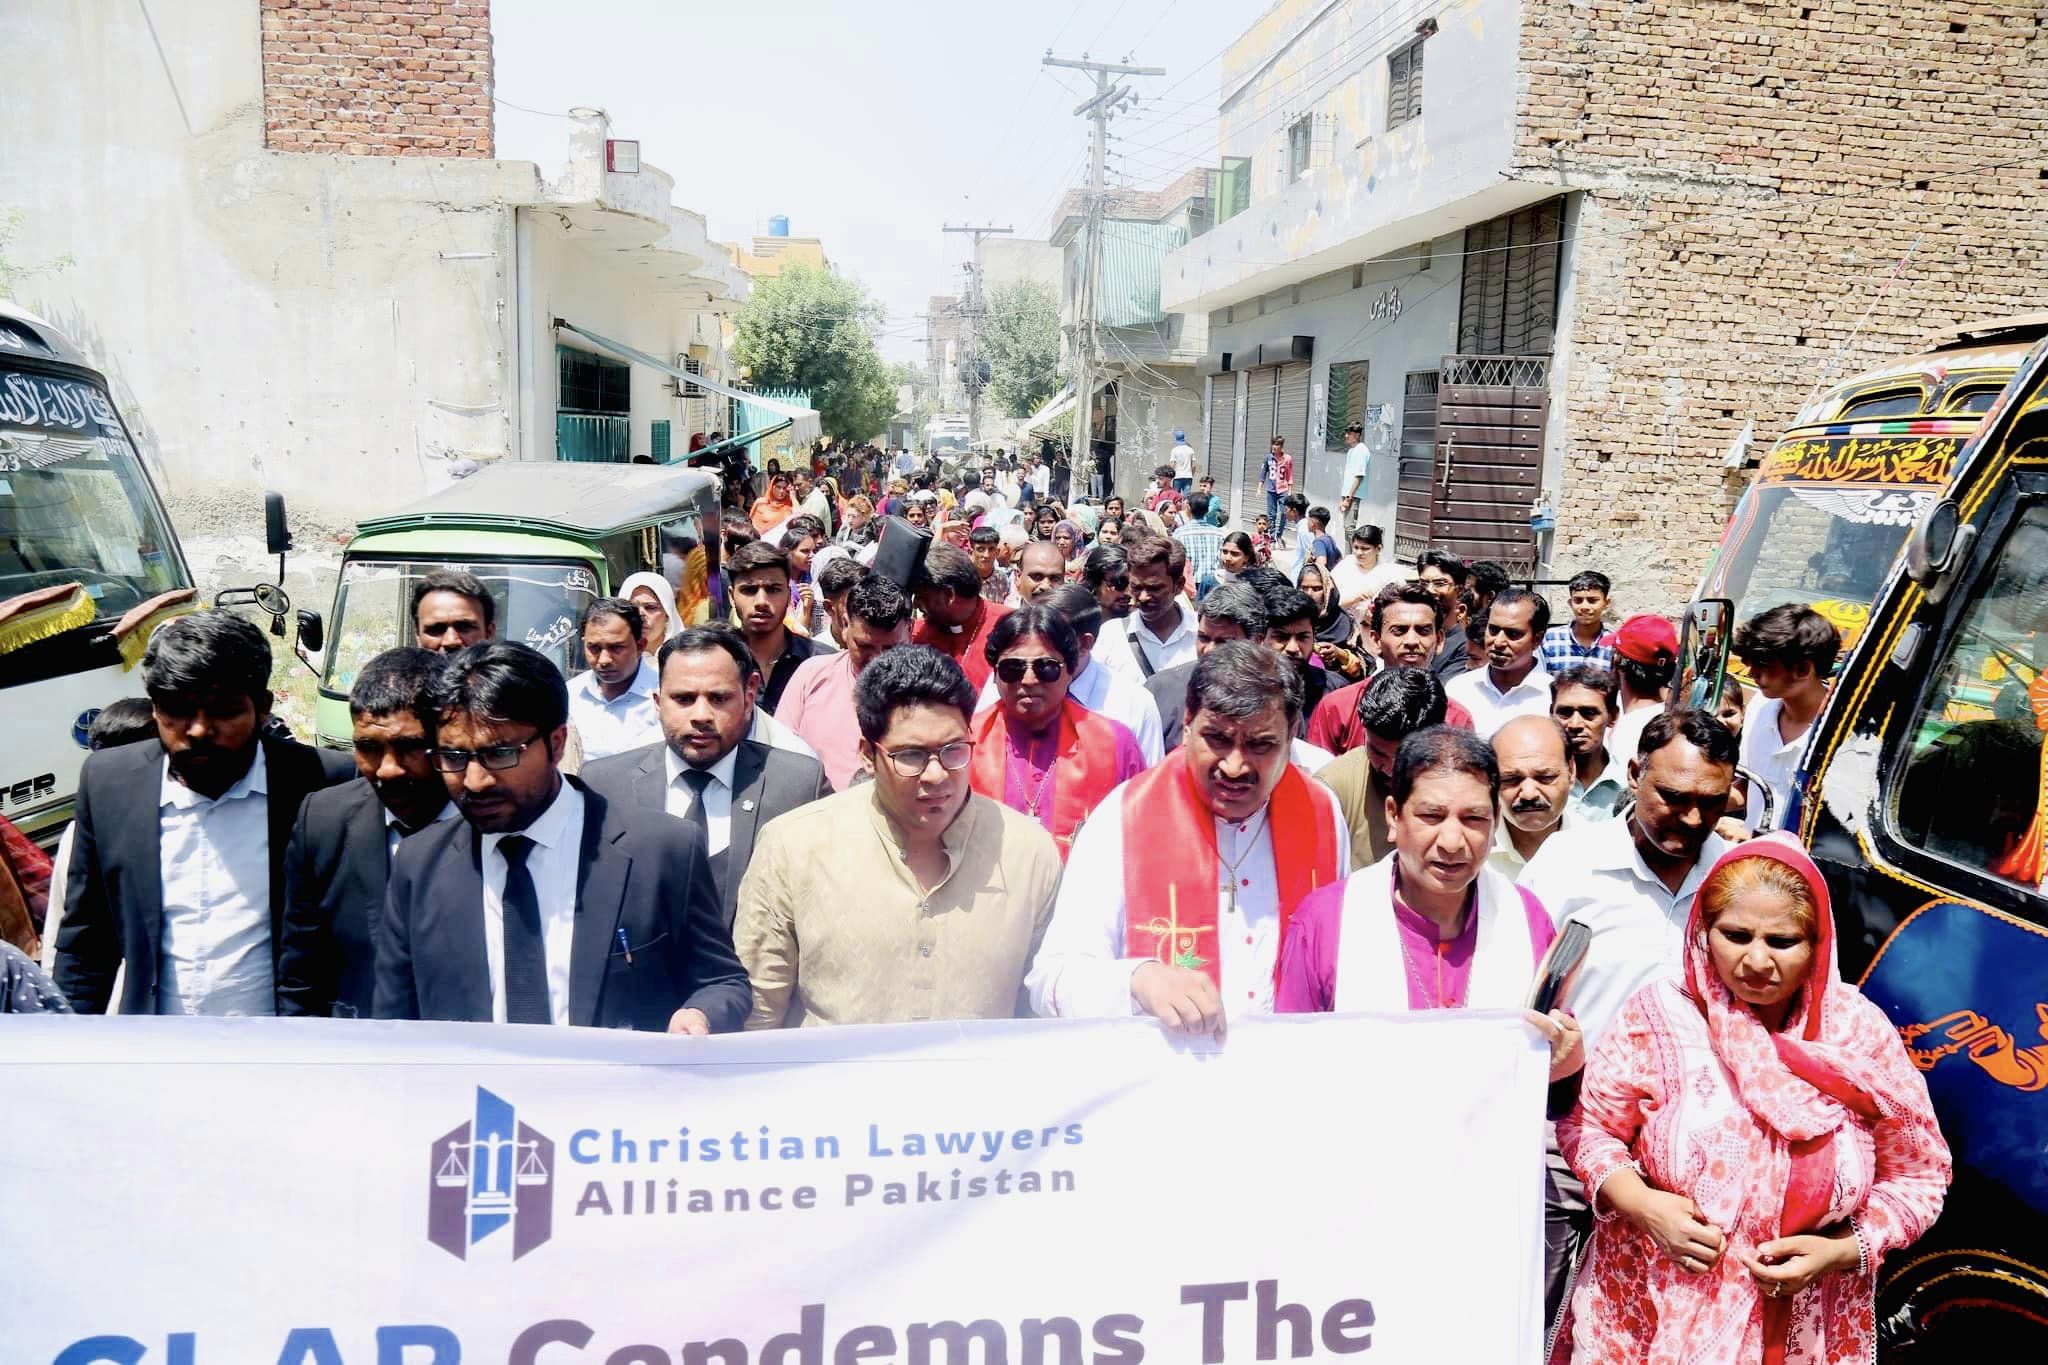 Protest to Stop Christians Genocide and Persecution in Pakistan